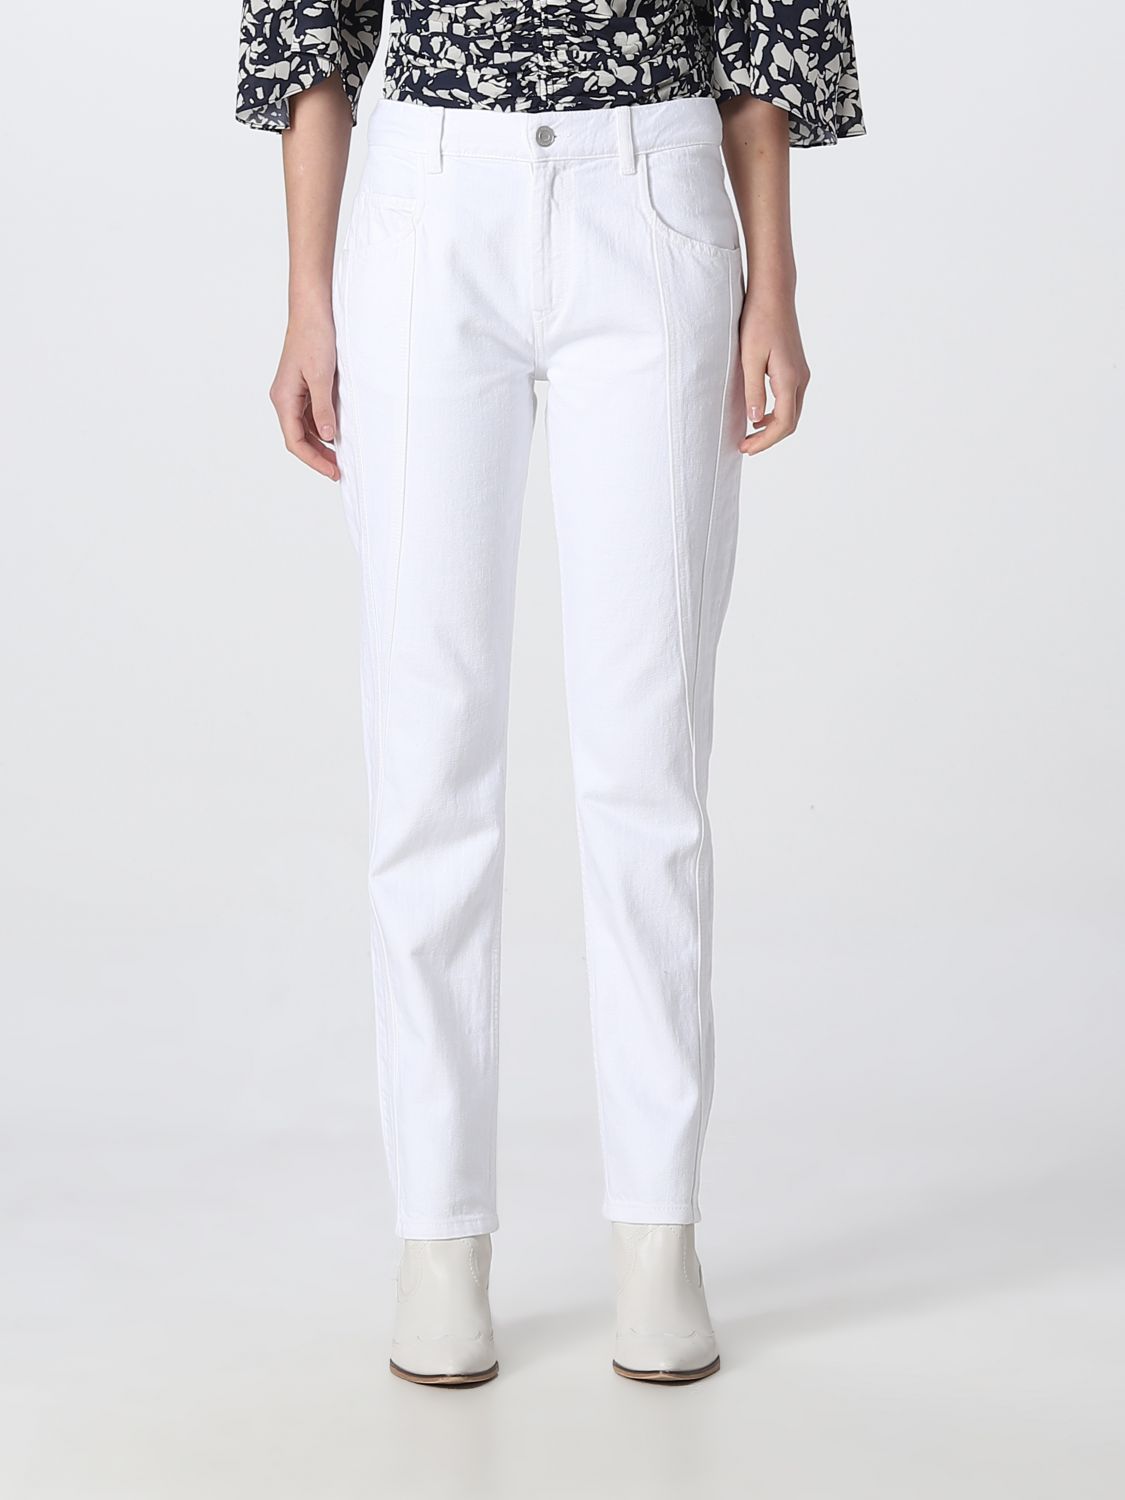 Isabel Marant Jeans  Woman In White